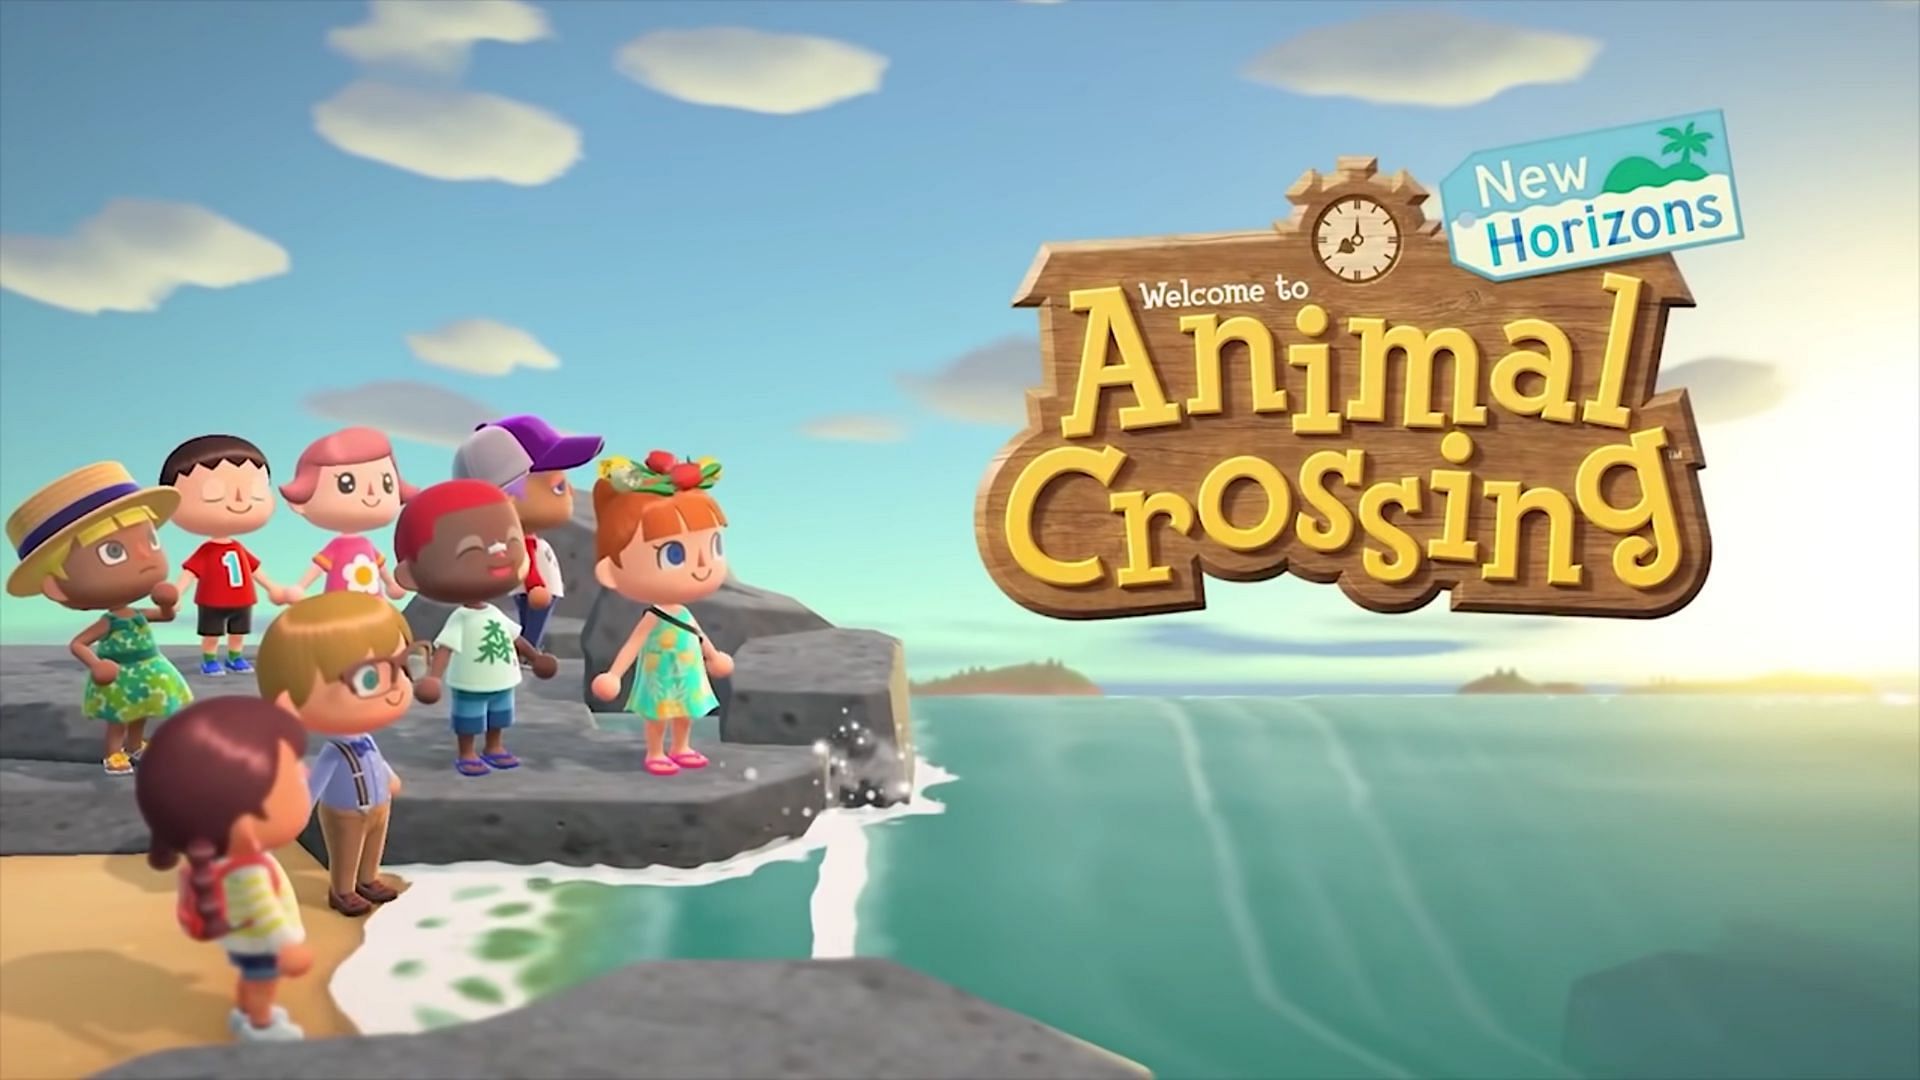 Rarest things players have spotted in Animal Crossing: New Horizons (Image via CopyCat/YouTube)